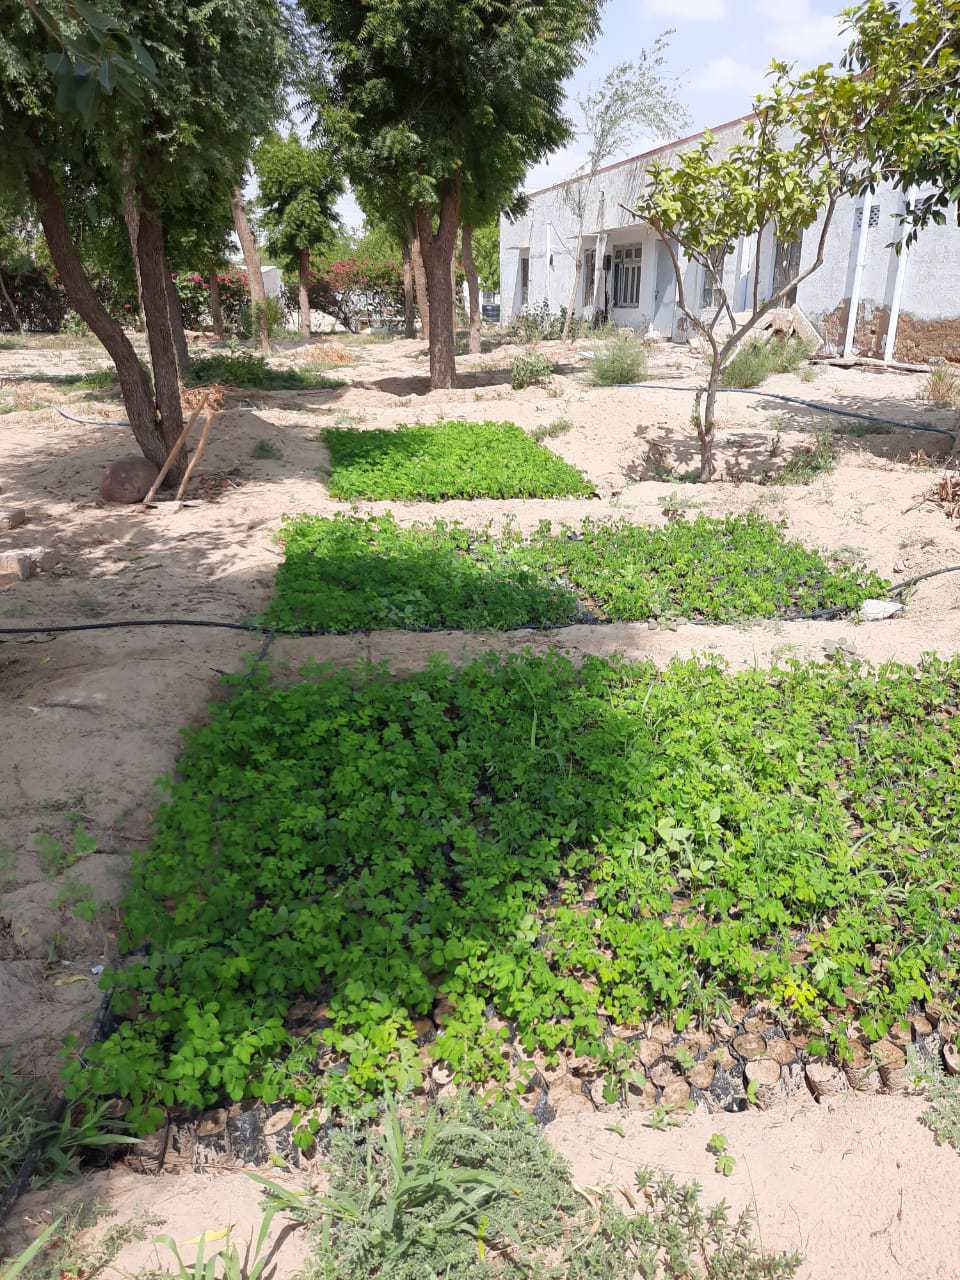 Historically, policies have sought to "green" the desert [image by: Rewant Jaipal]